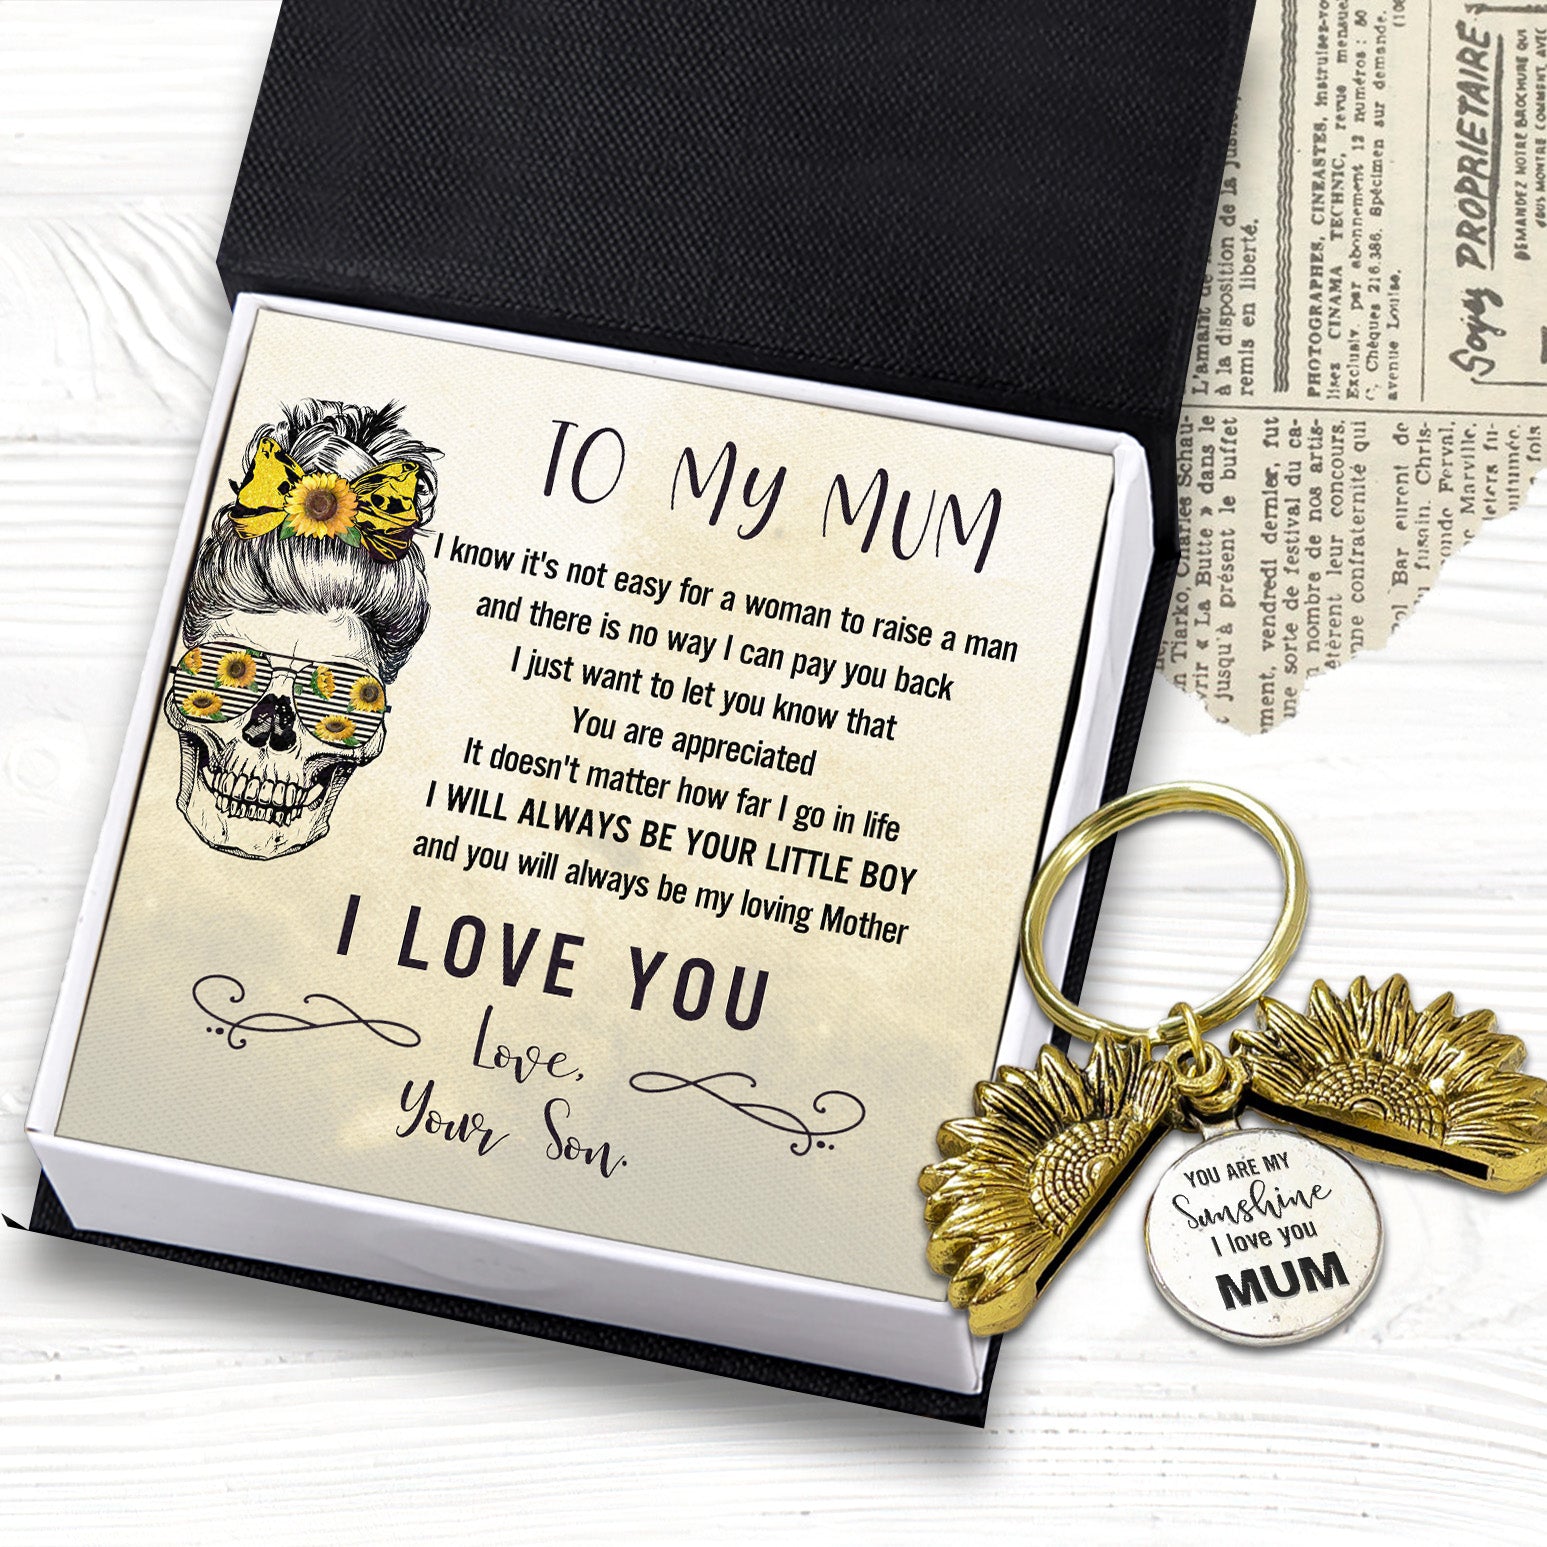 Sunflower Keychain - Skull - To My Mum - From Son - I Love You - Ukgkqb19004